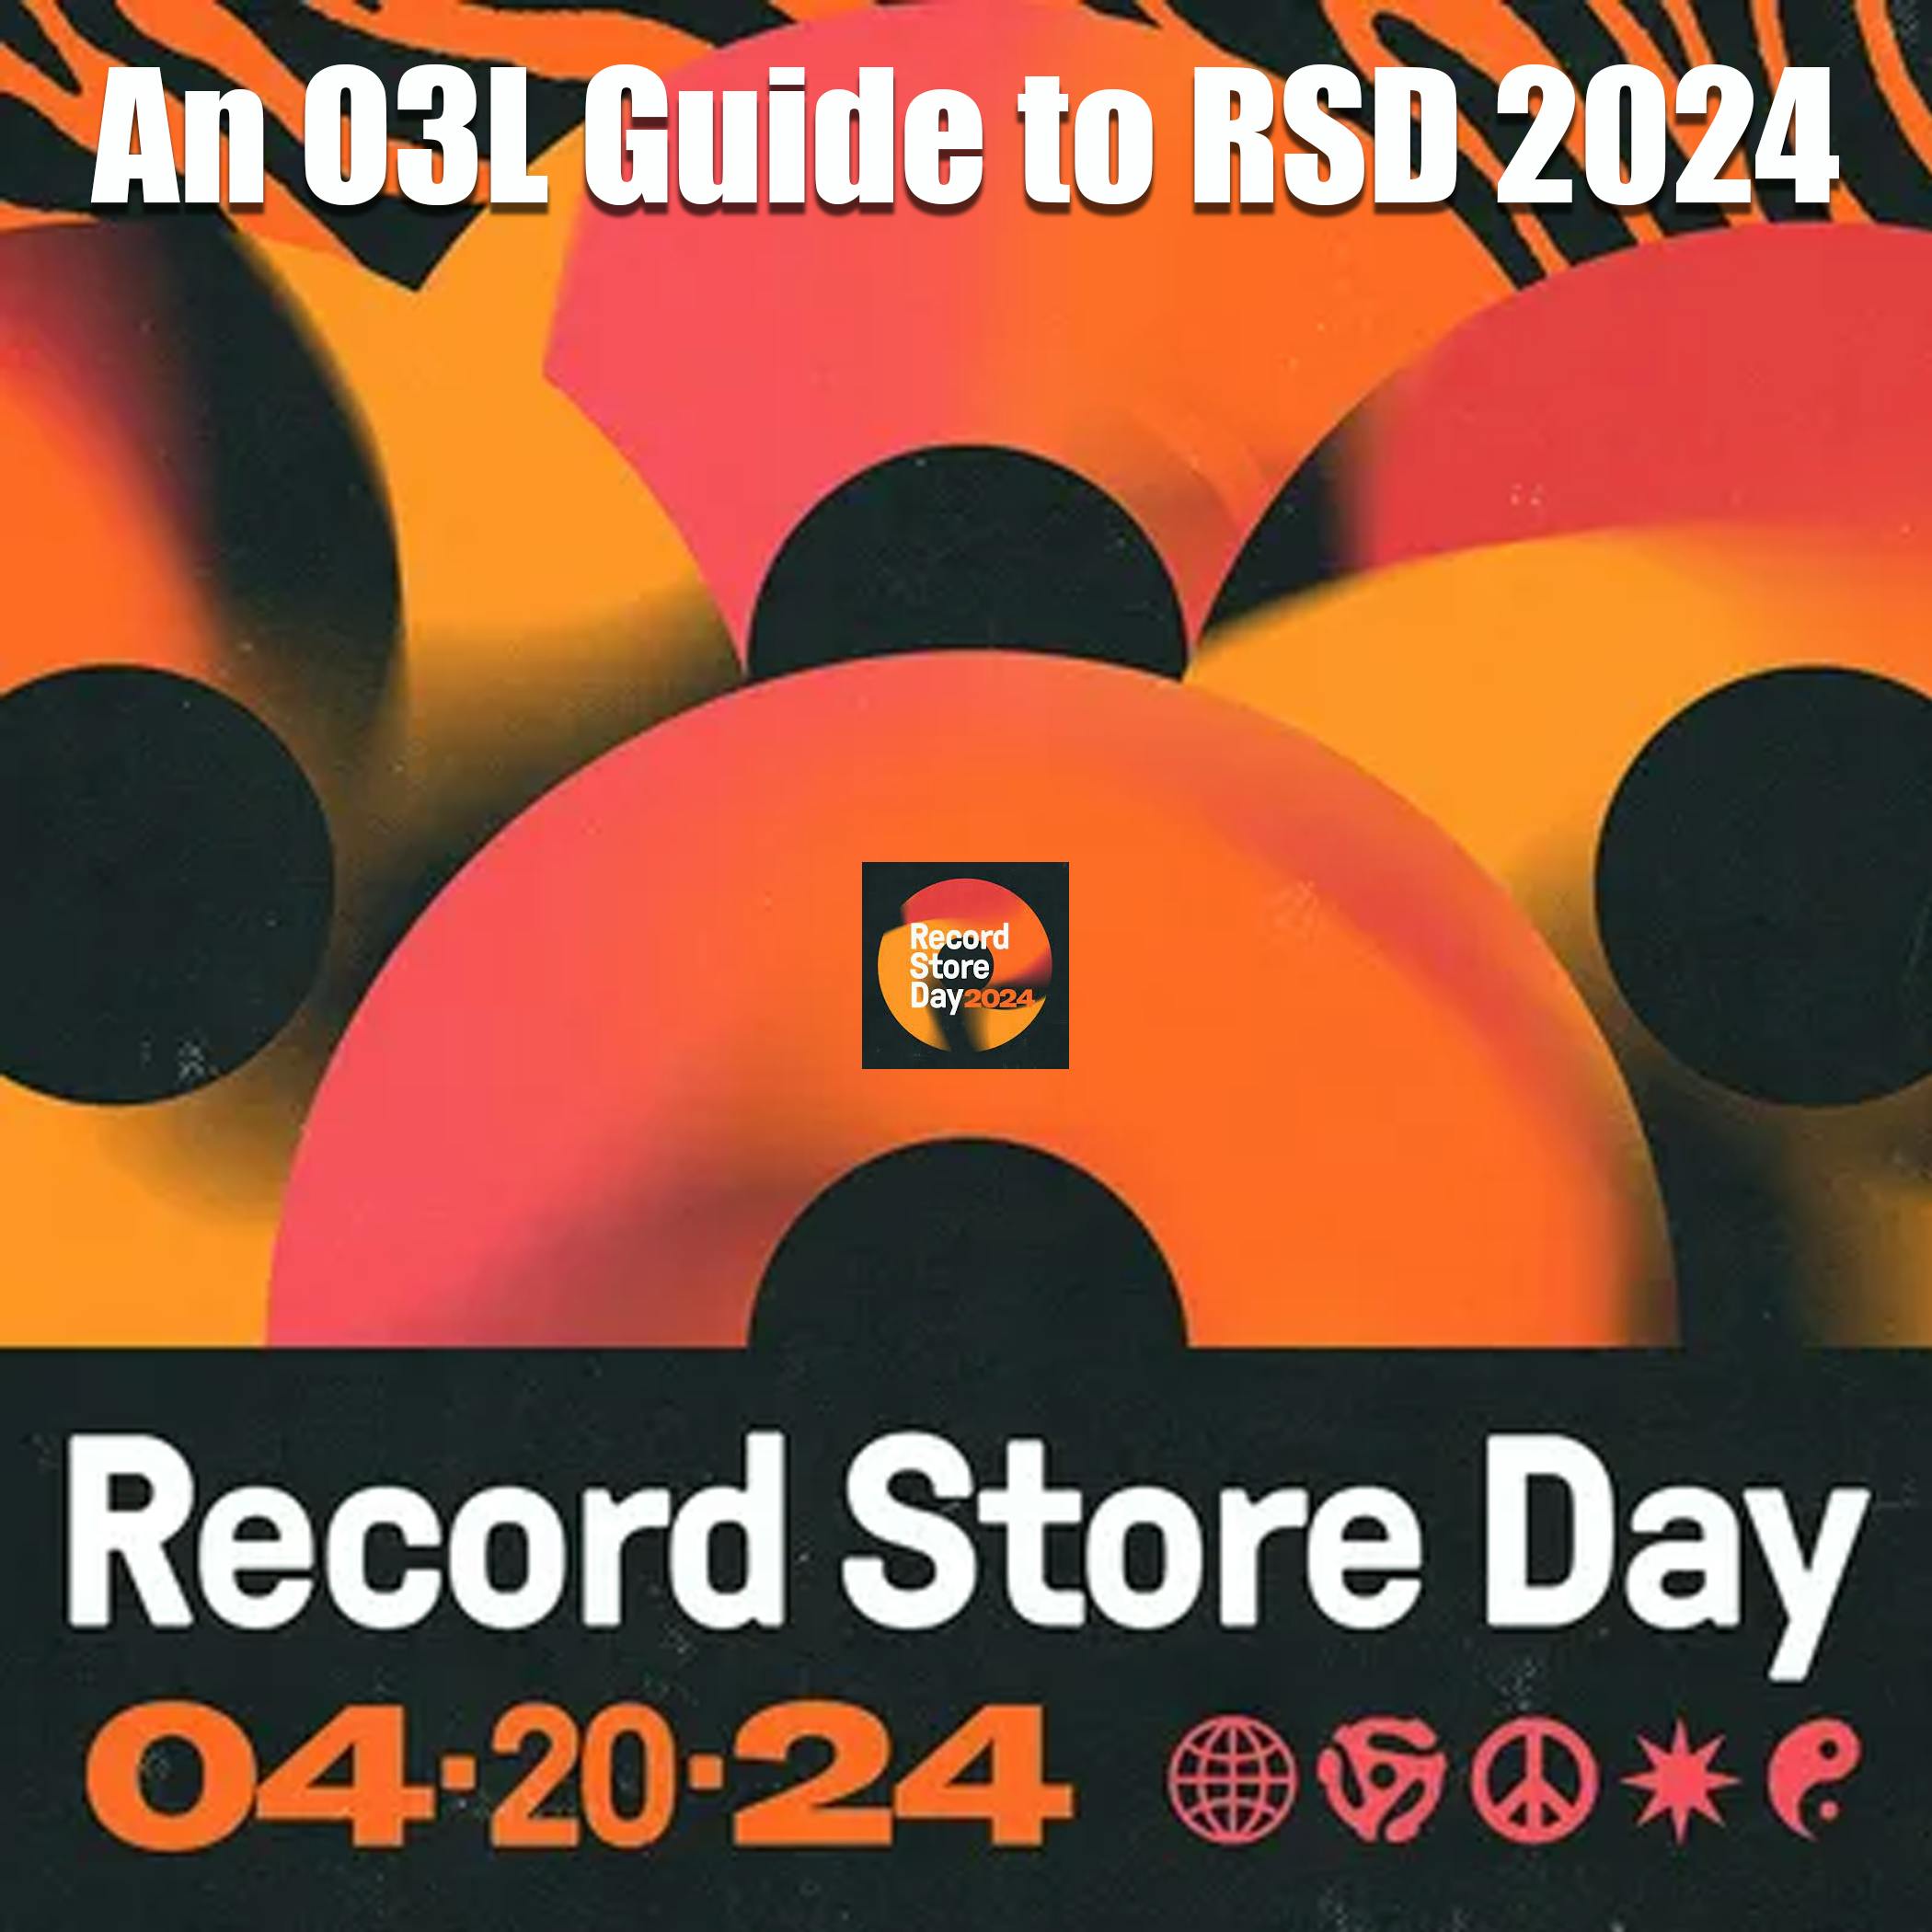 O3L Presents: An O3L Guide to Record Store Day 2024